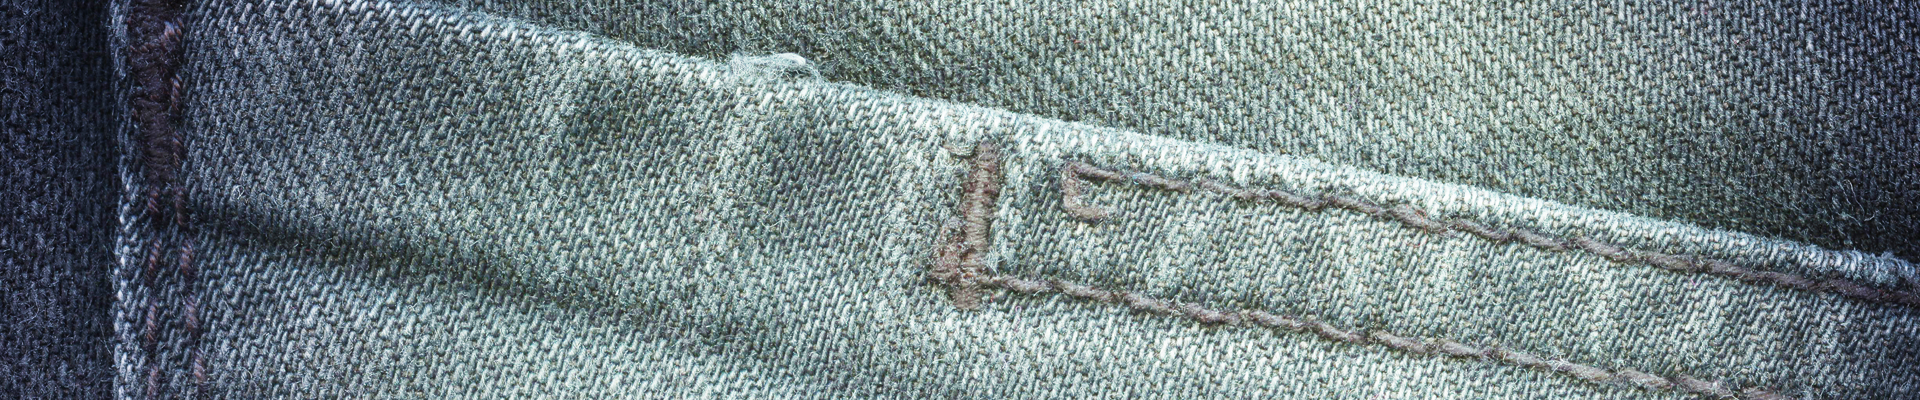 Close up of a jeans pocket 